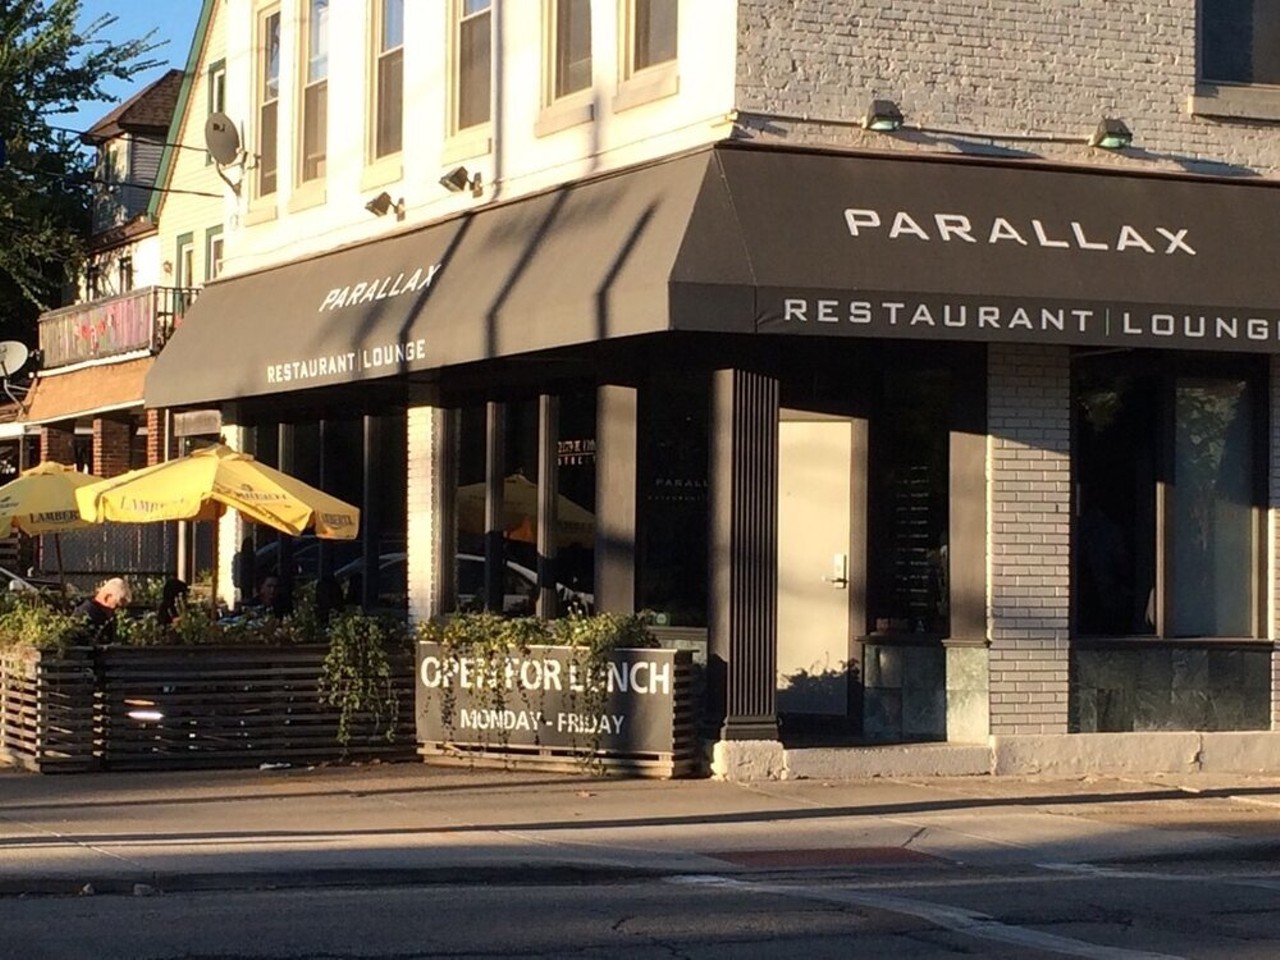 Parallax 
2179 W. 11th St.., Cleveland
Despite loose assurances to the contrary, Zack and Julian Bruell will not be reopening Parallax, the Tremont restaurant that closed last November after 18 years.  But it will soon have new life and new operators. The trio of Terry Francona, Jason Beudert and Chelsea Williams – still riding high off their recent successes at Geraci’s Slice Shop in downtown Cleveland – have signed a lease to take over the iconic space. The budding restaurant group plans to open a unique steakhouse concept called STEAK early next year.